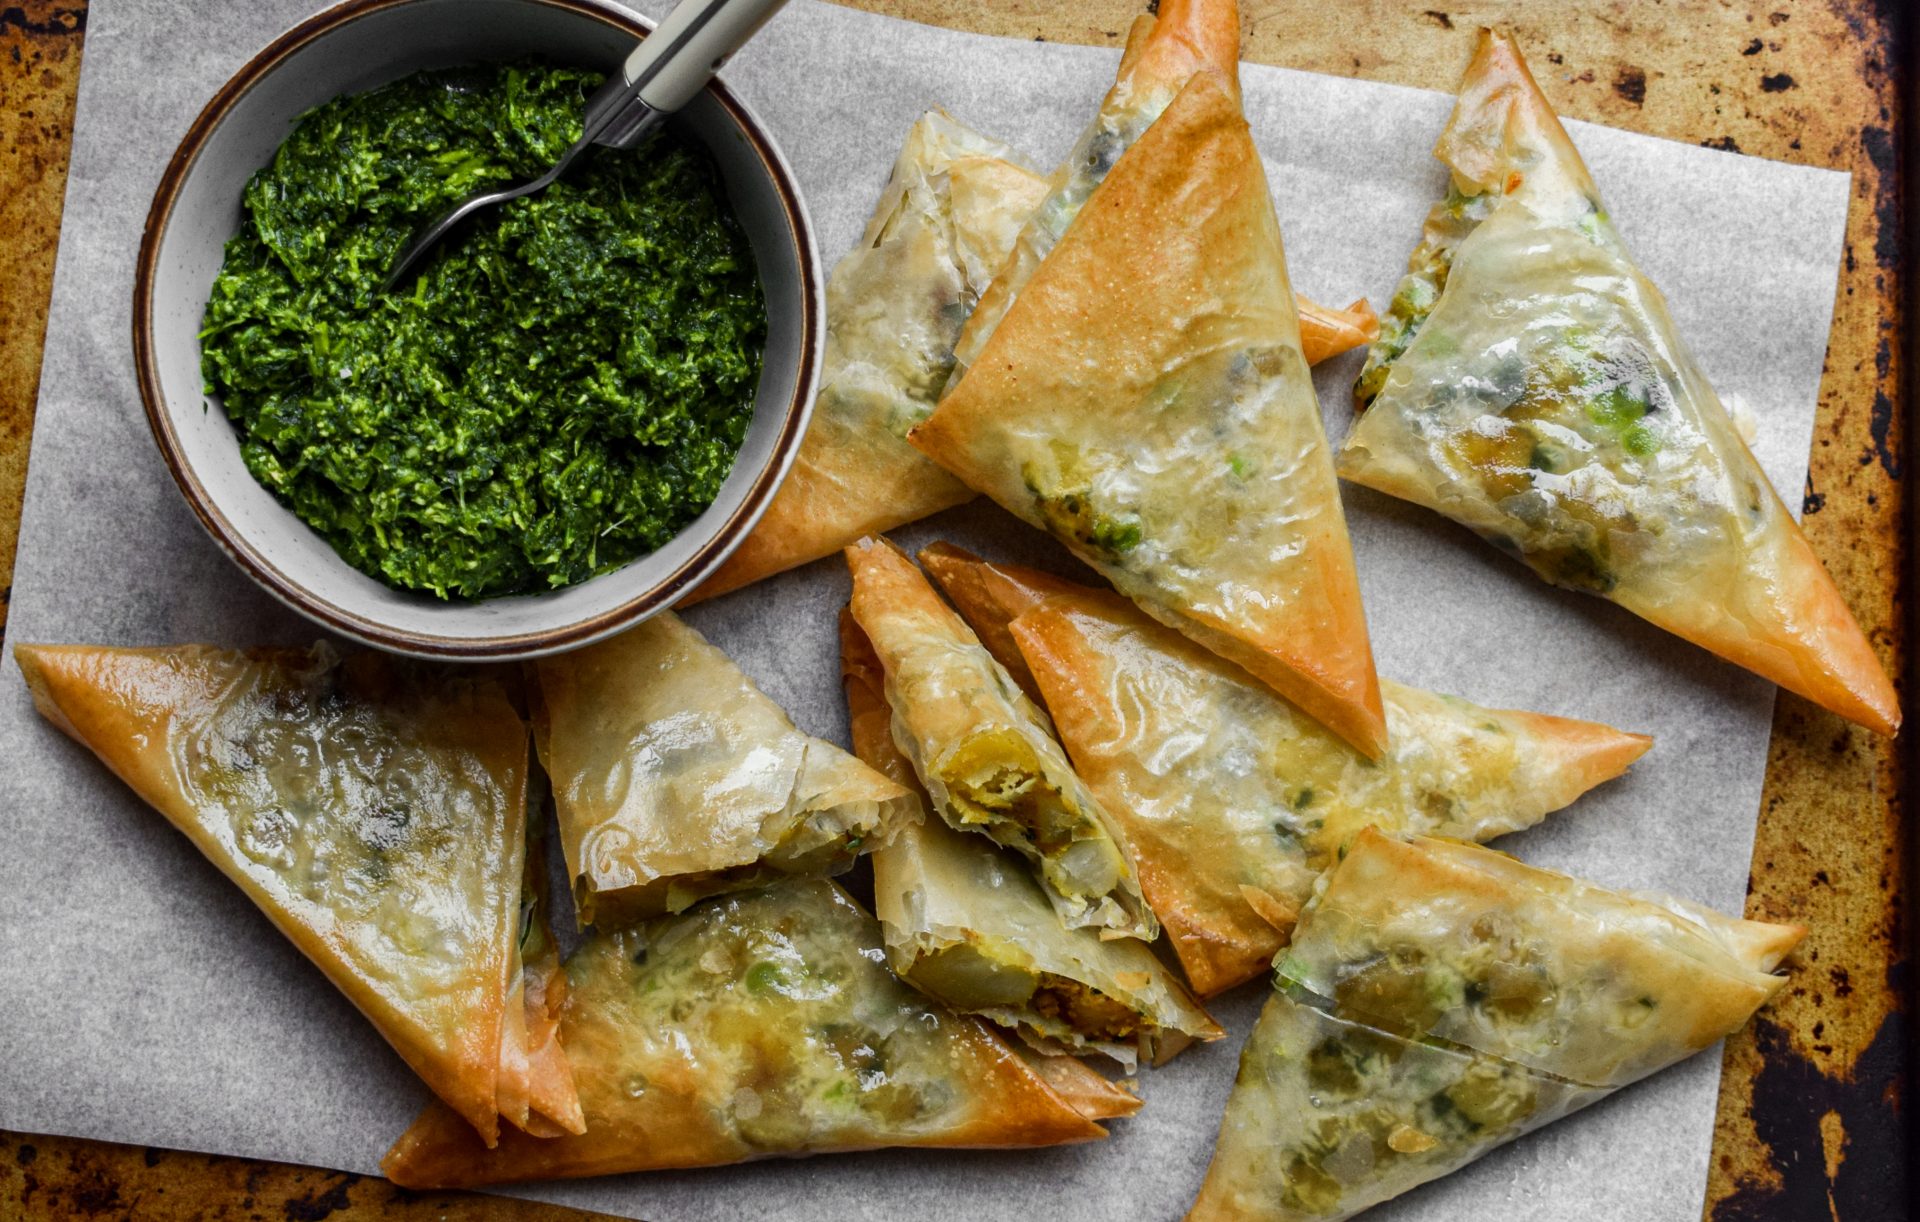 Air Fryer Samosas with Filo Pastry